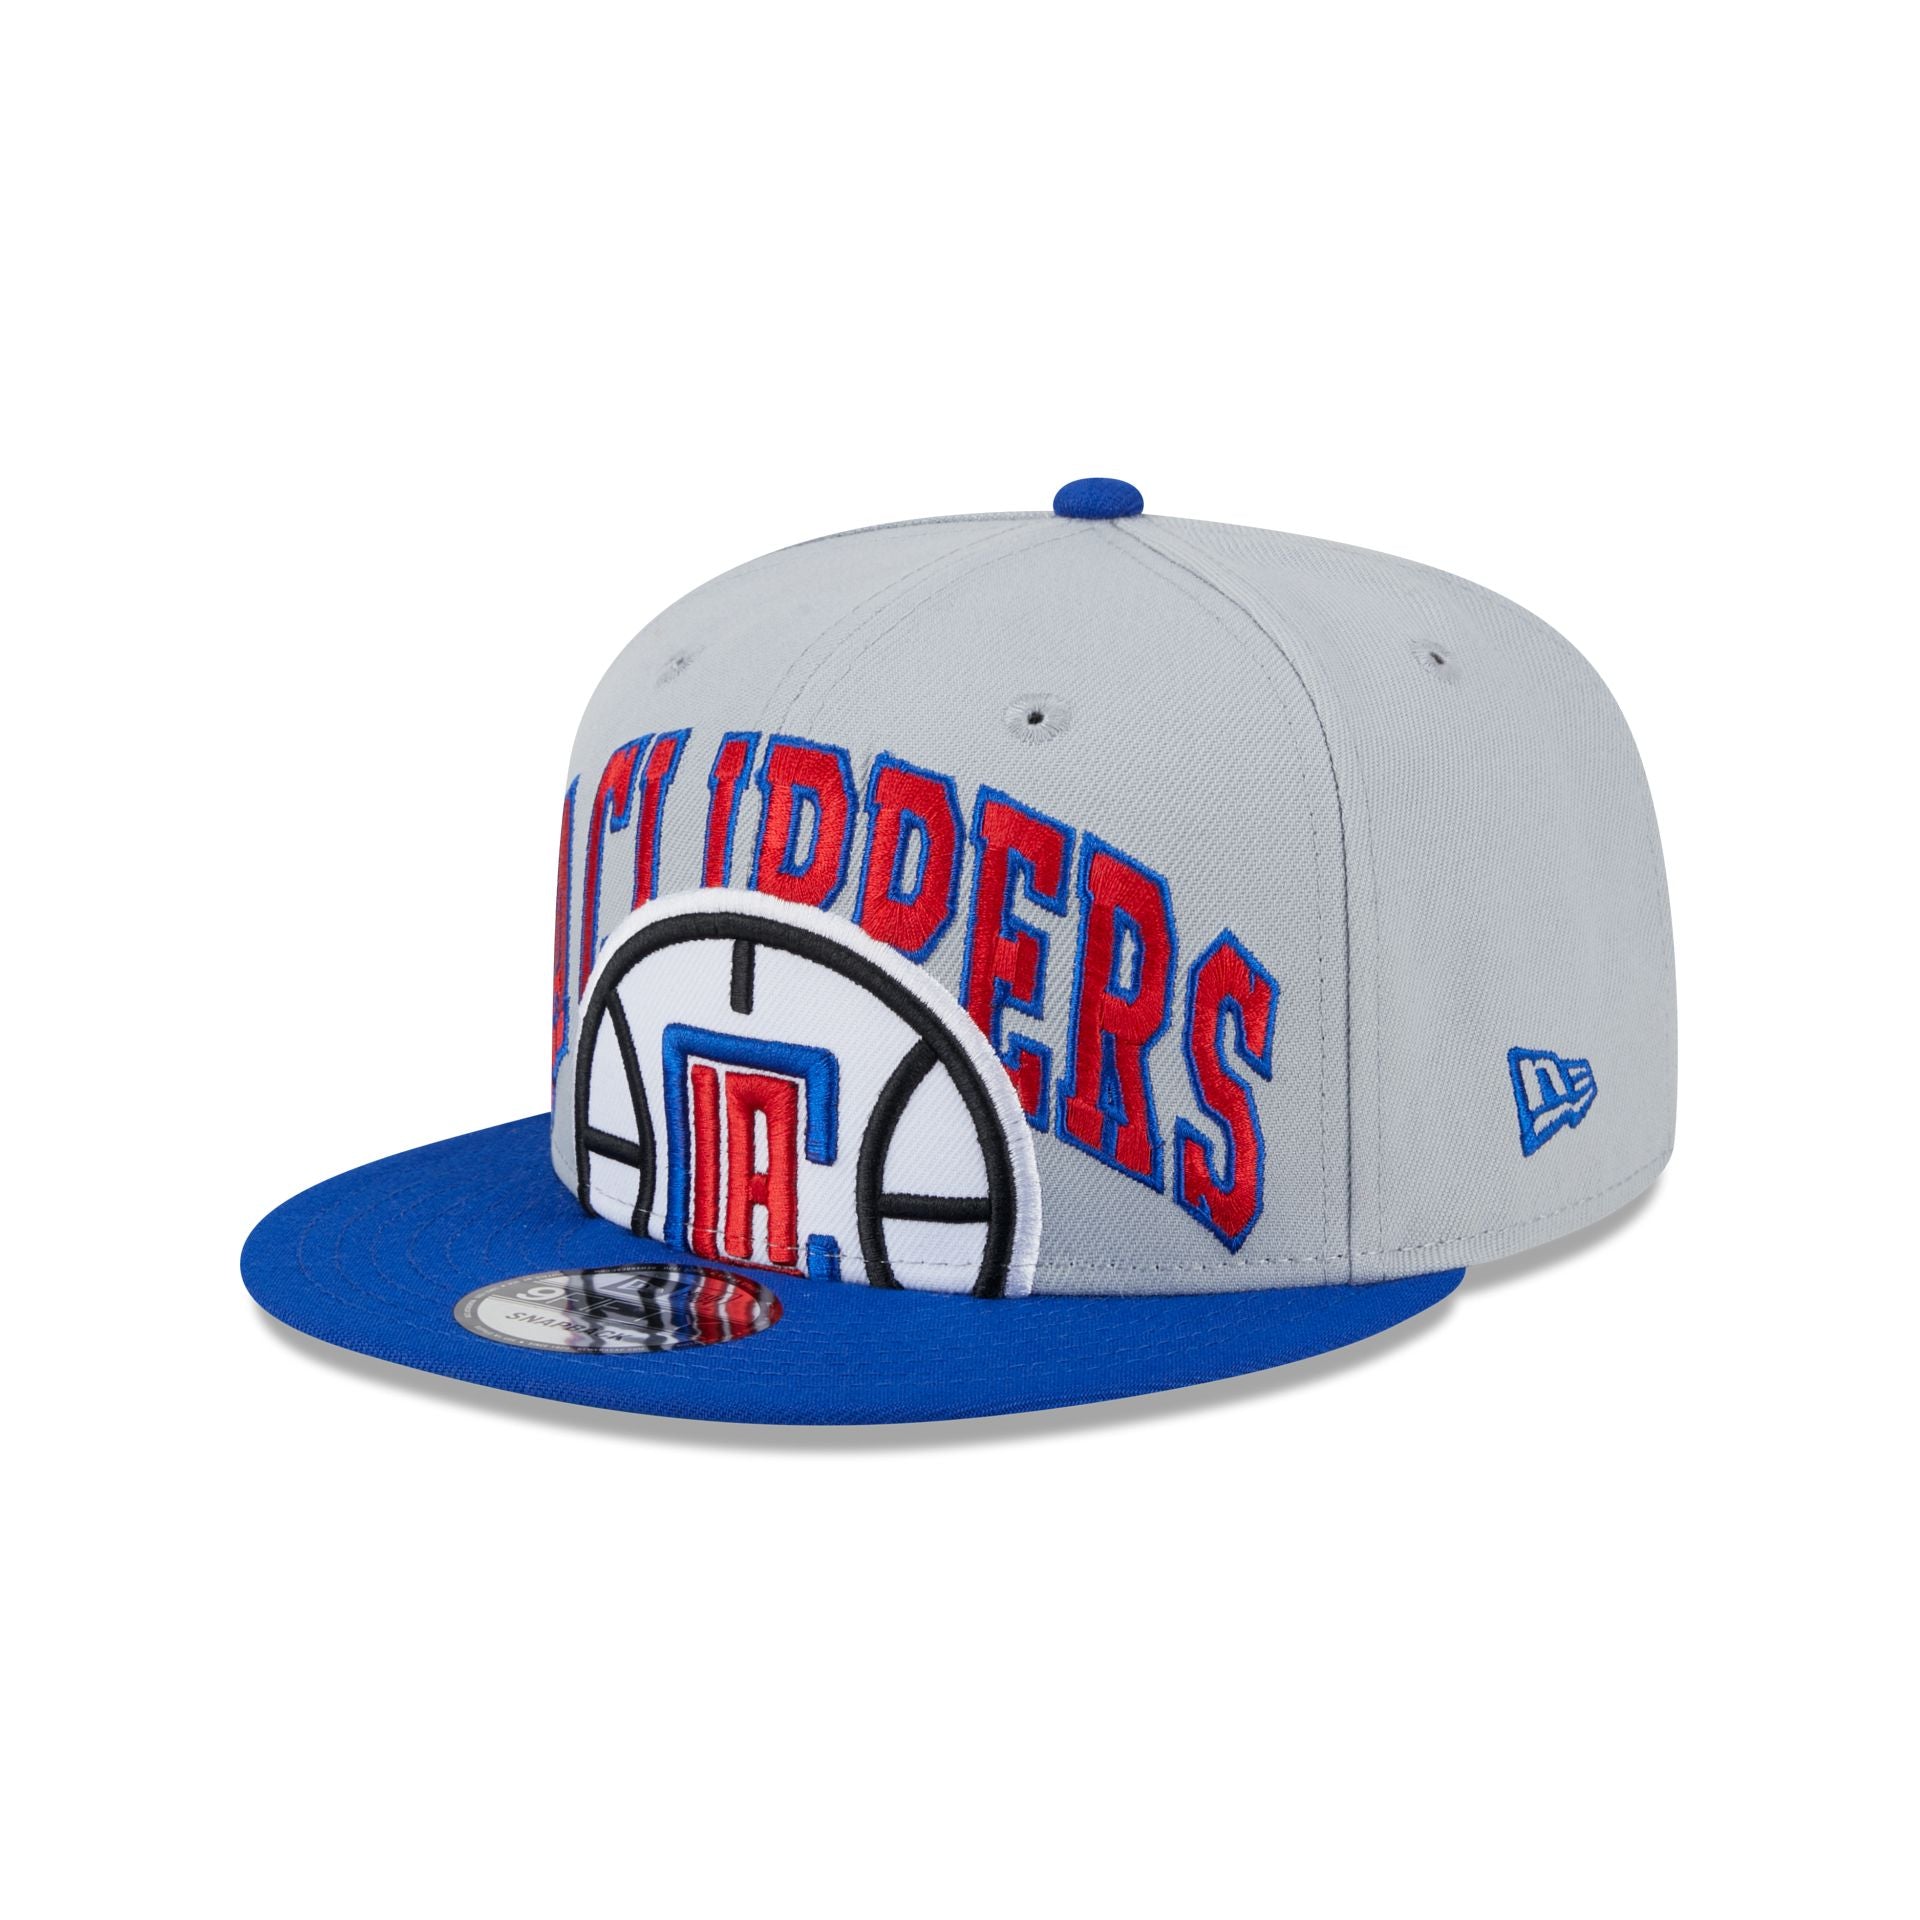 New Era Clippers Two Tone 9FIFTY Snapback Hat